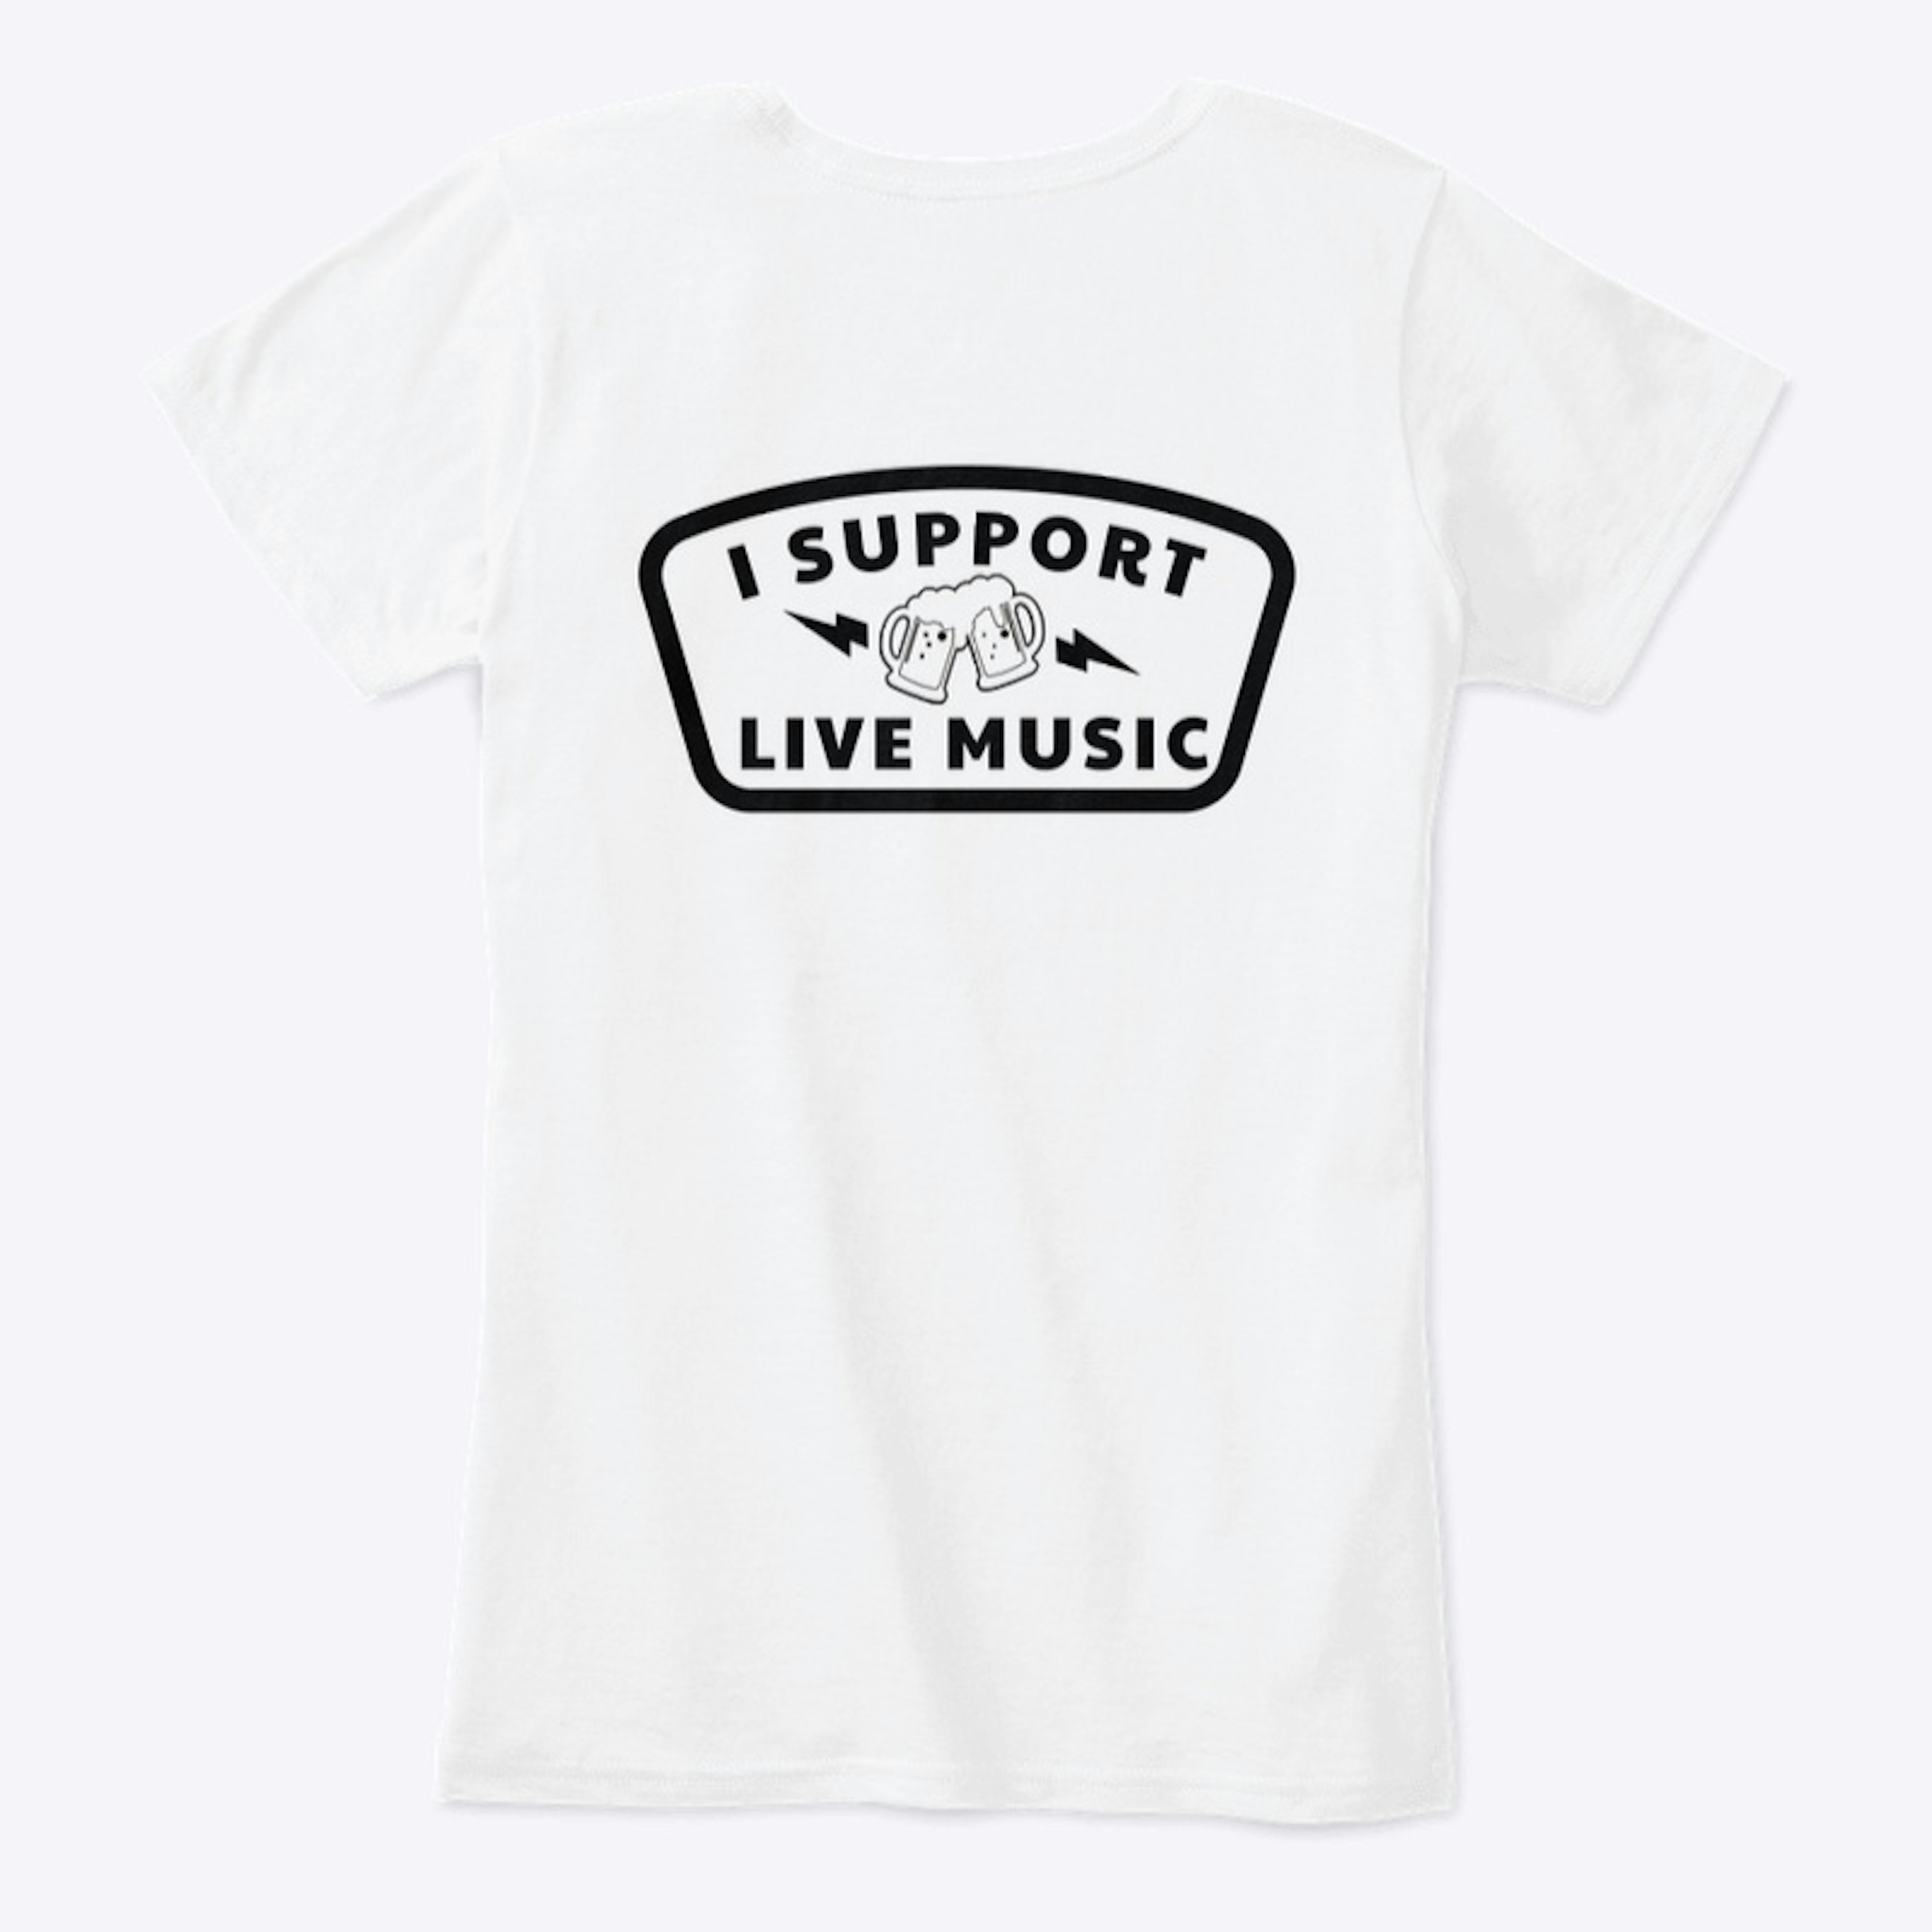 I Support Live Music 